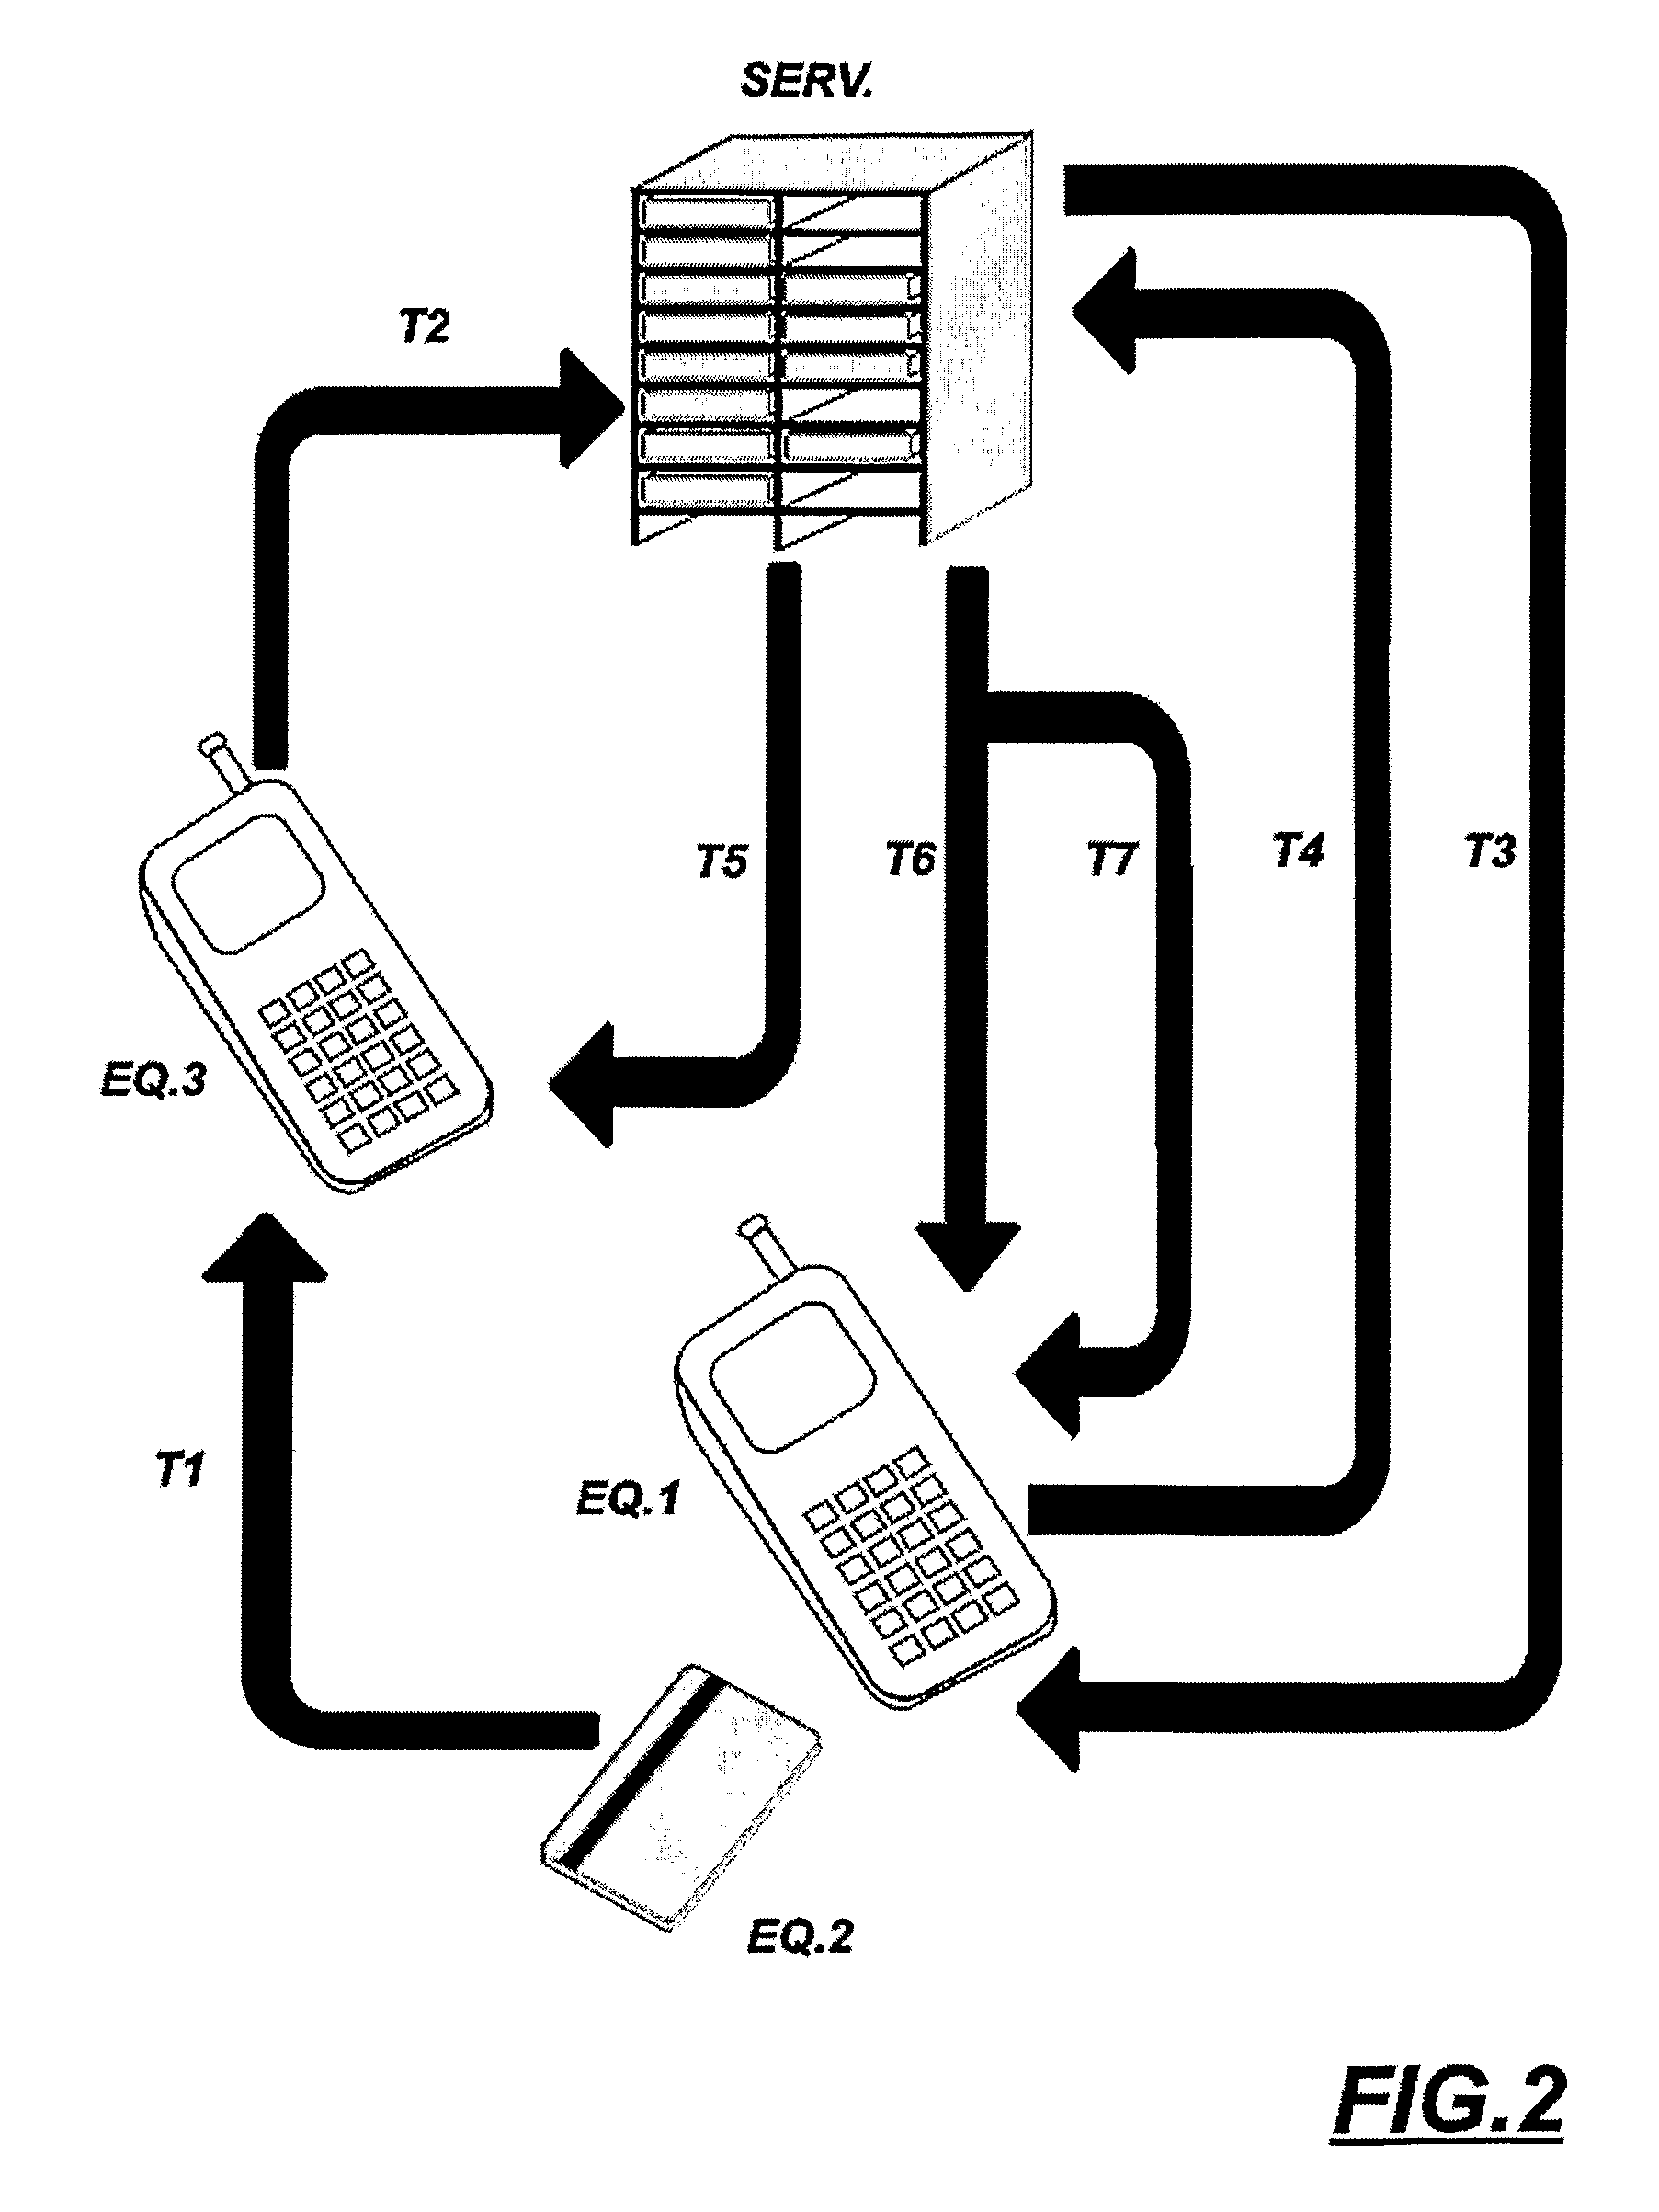 System for managing and facilitating financial transactions locally or remotely made